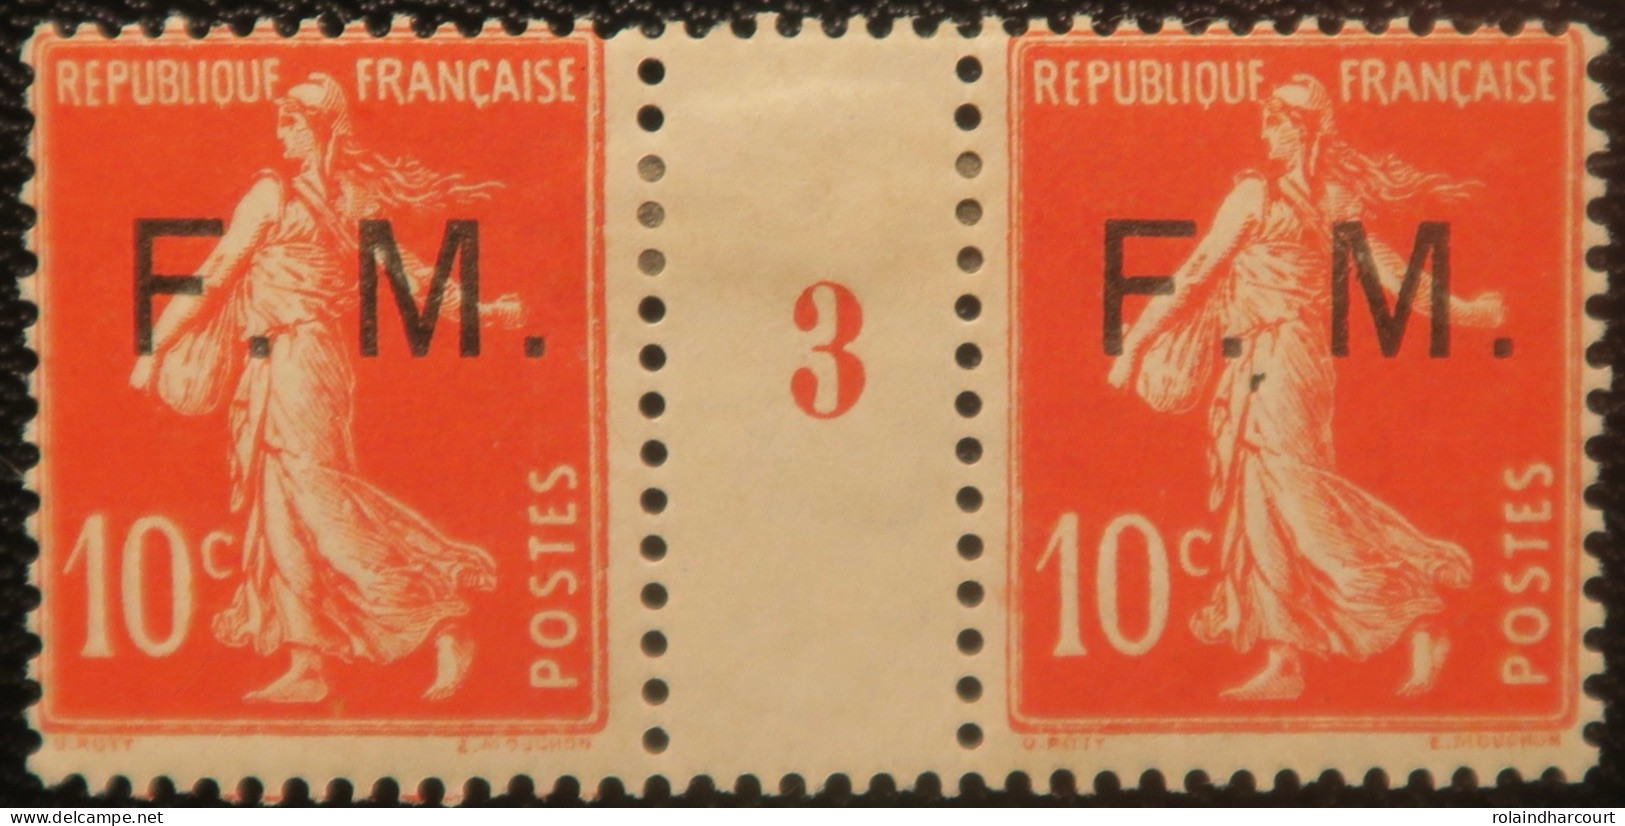 LP2943/83 - FRANCE - 1913 - TYPE SEMEUSE CAMEE - F.M. - N°5 Mill 3 TIMBRES NEUFS* - Millésimes